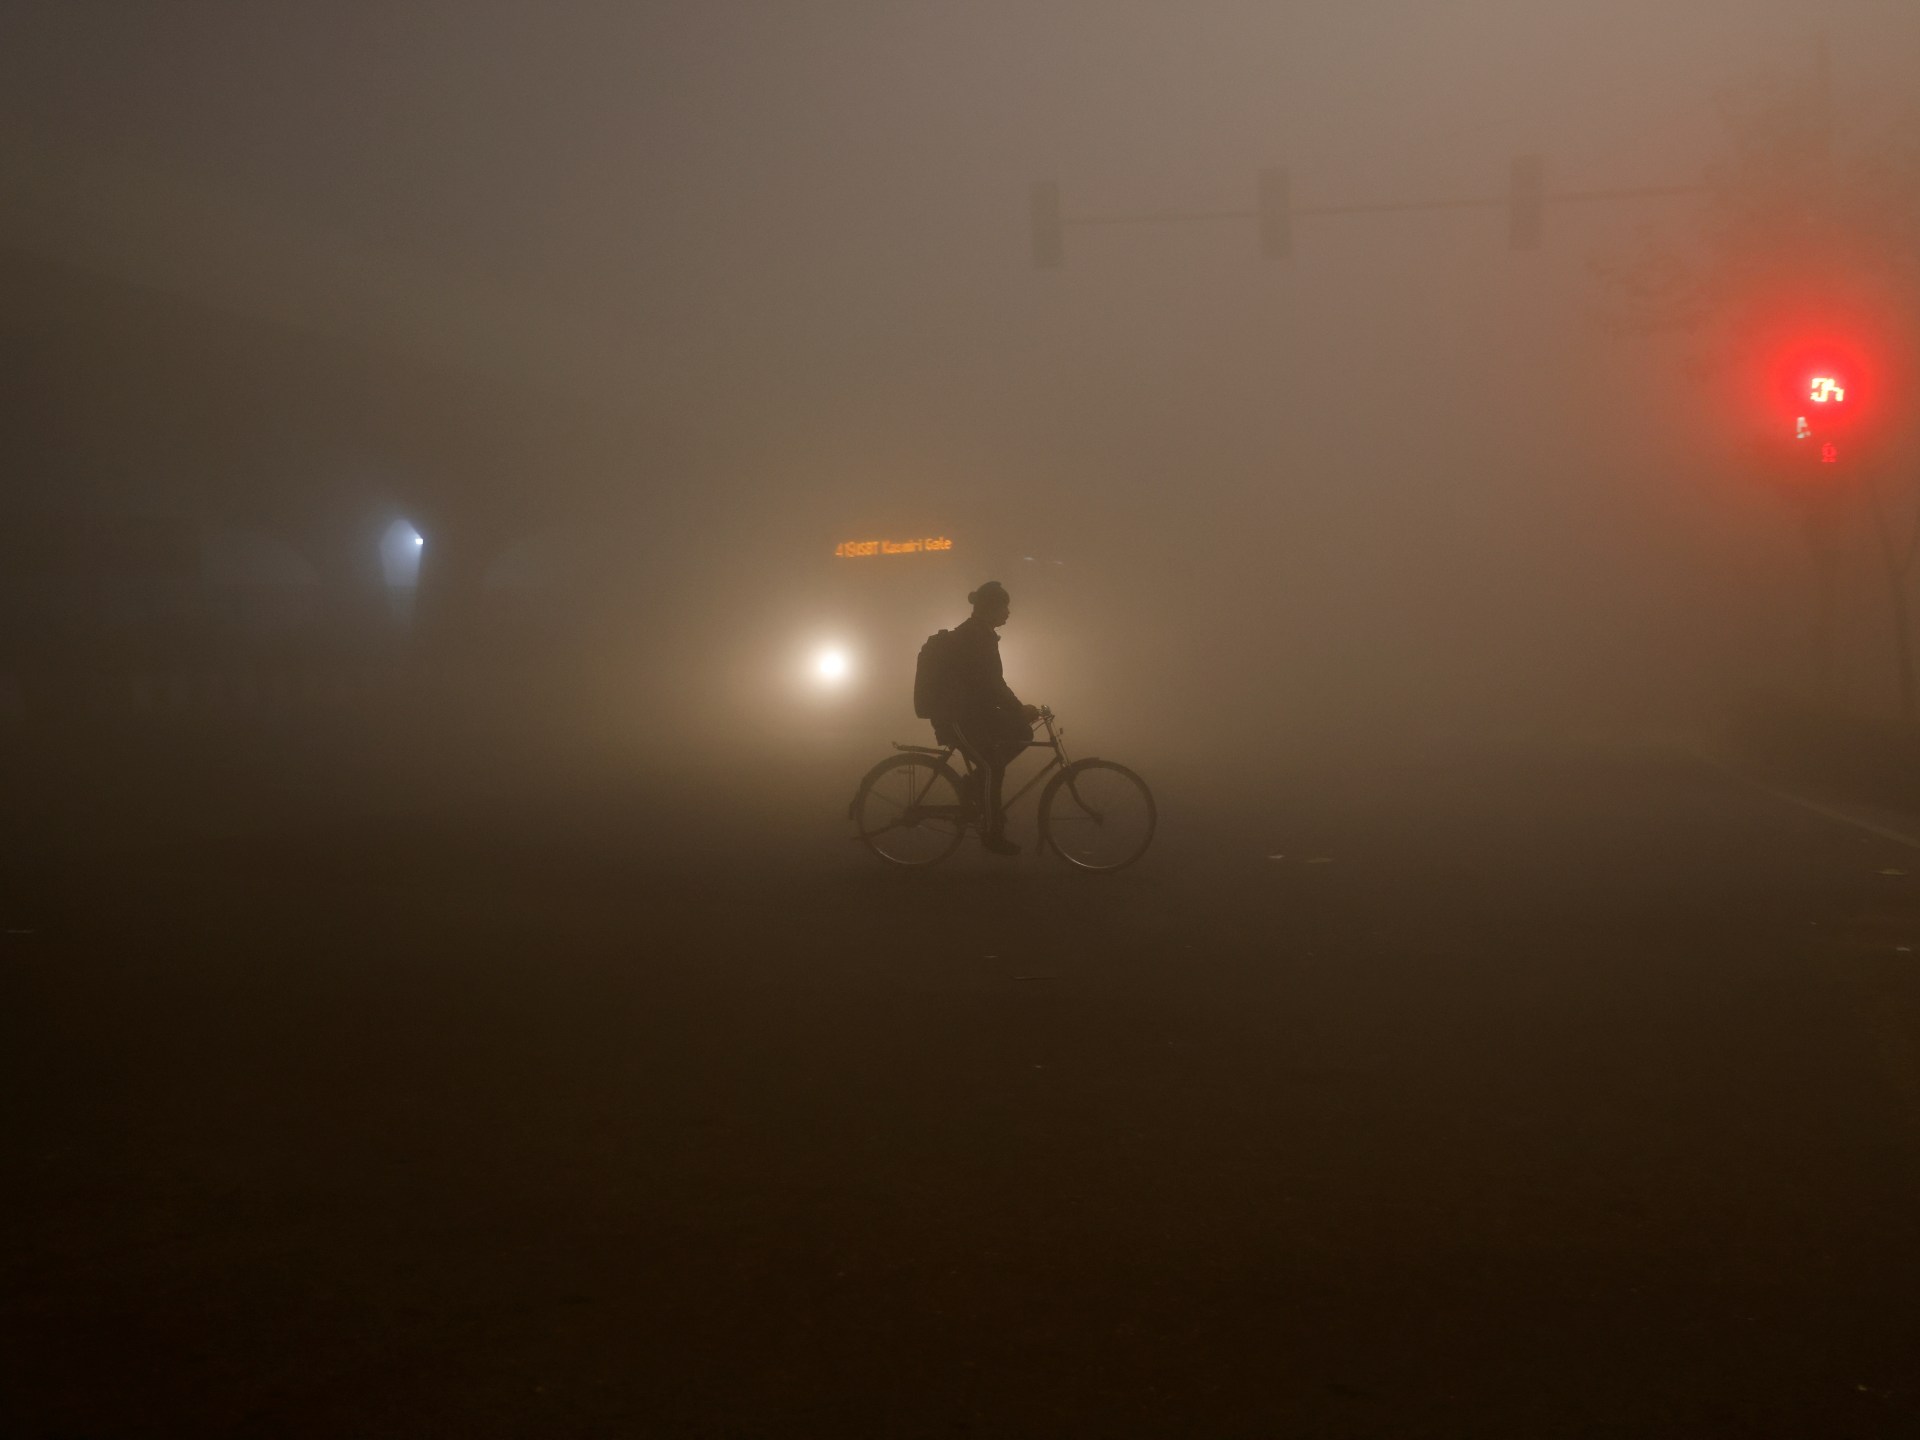 bangladesh-capital-most-polluted-as-toxic-smog-engulfs-south-asian-cities